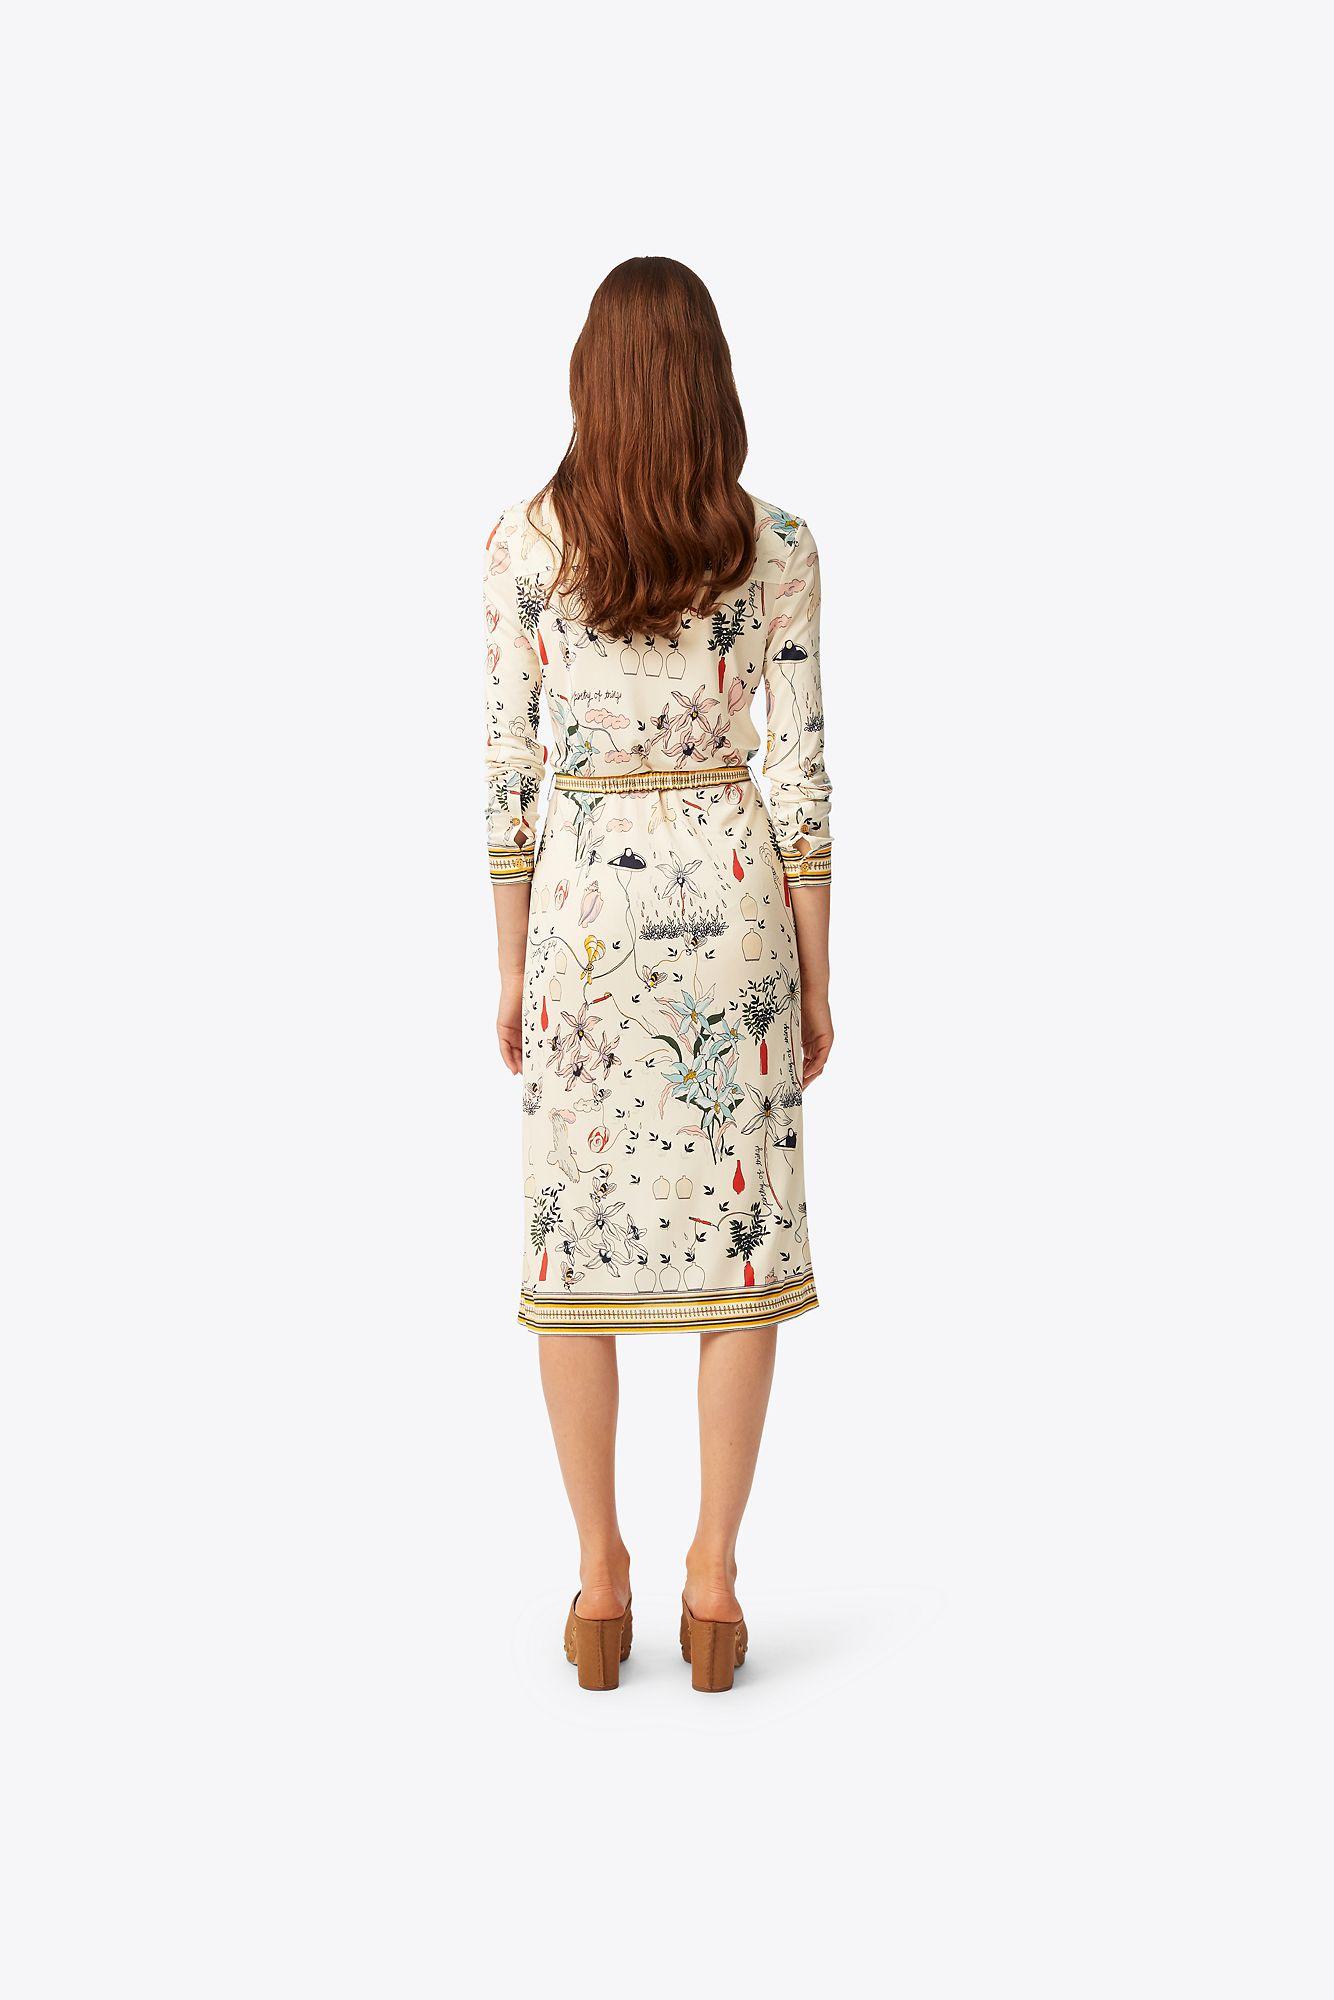 Tory Burch Printed Shirtdress in White | Lyst